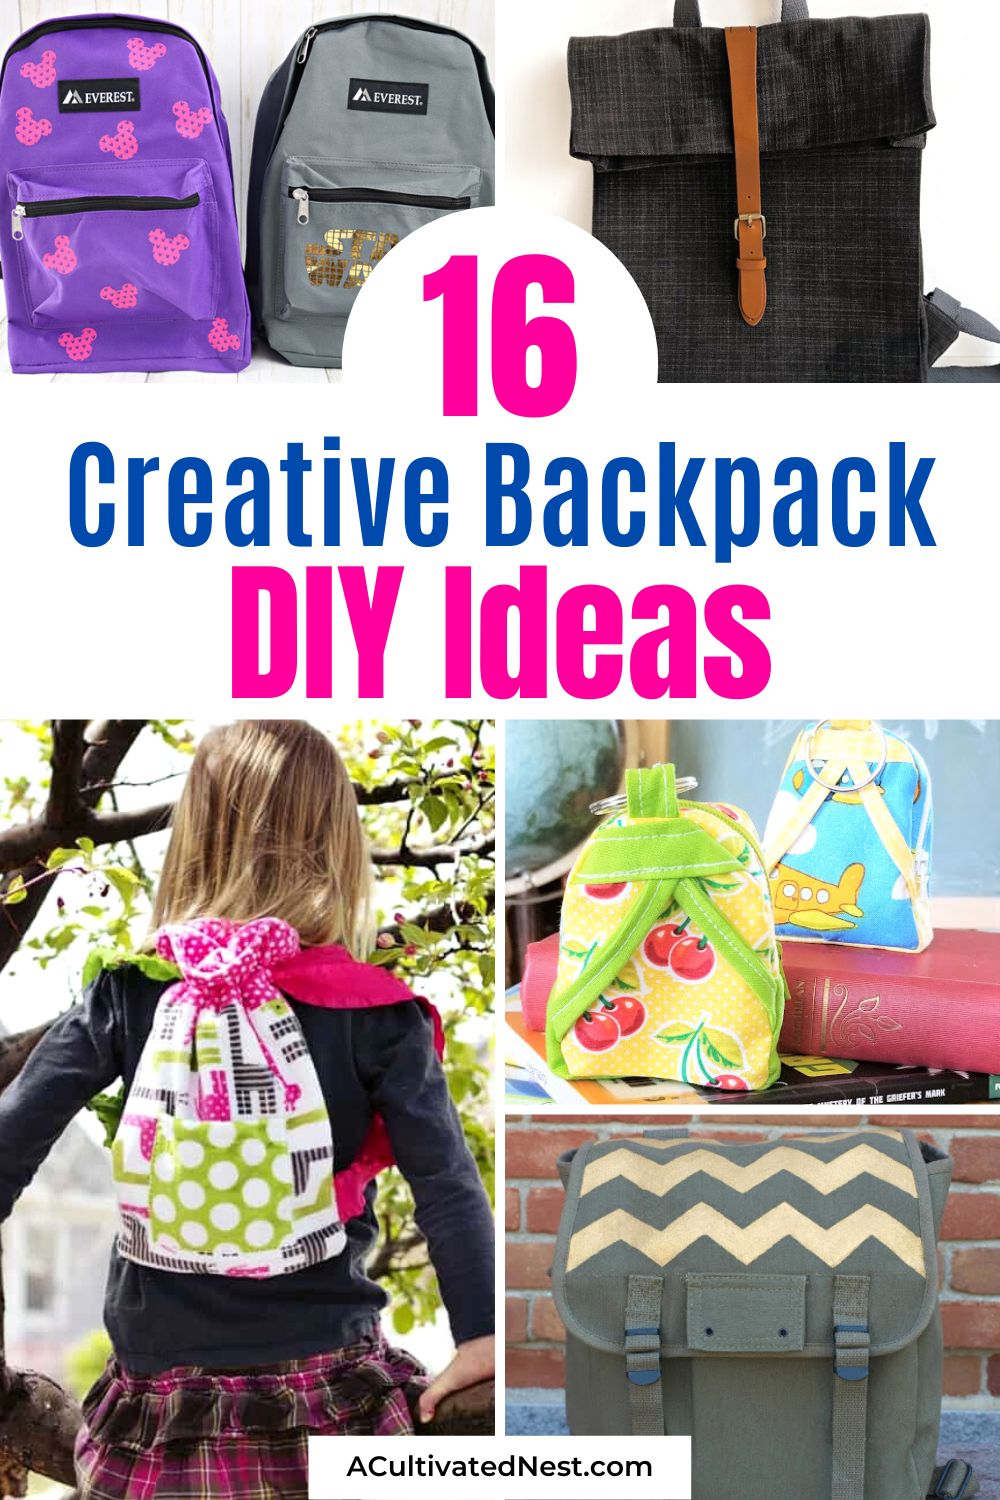 16 Creative Backpack DIY Projects- Elevate your backpack game with these creative backpack DIY projects! These crafty ideas will help you transform your backpack into a stylish and personalized accessory! | #BackpackDIY #CraftyProjects #diyProjects #backToSchool #ACultivatedNest